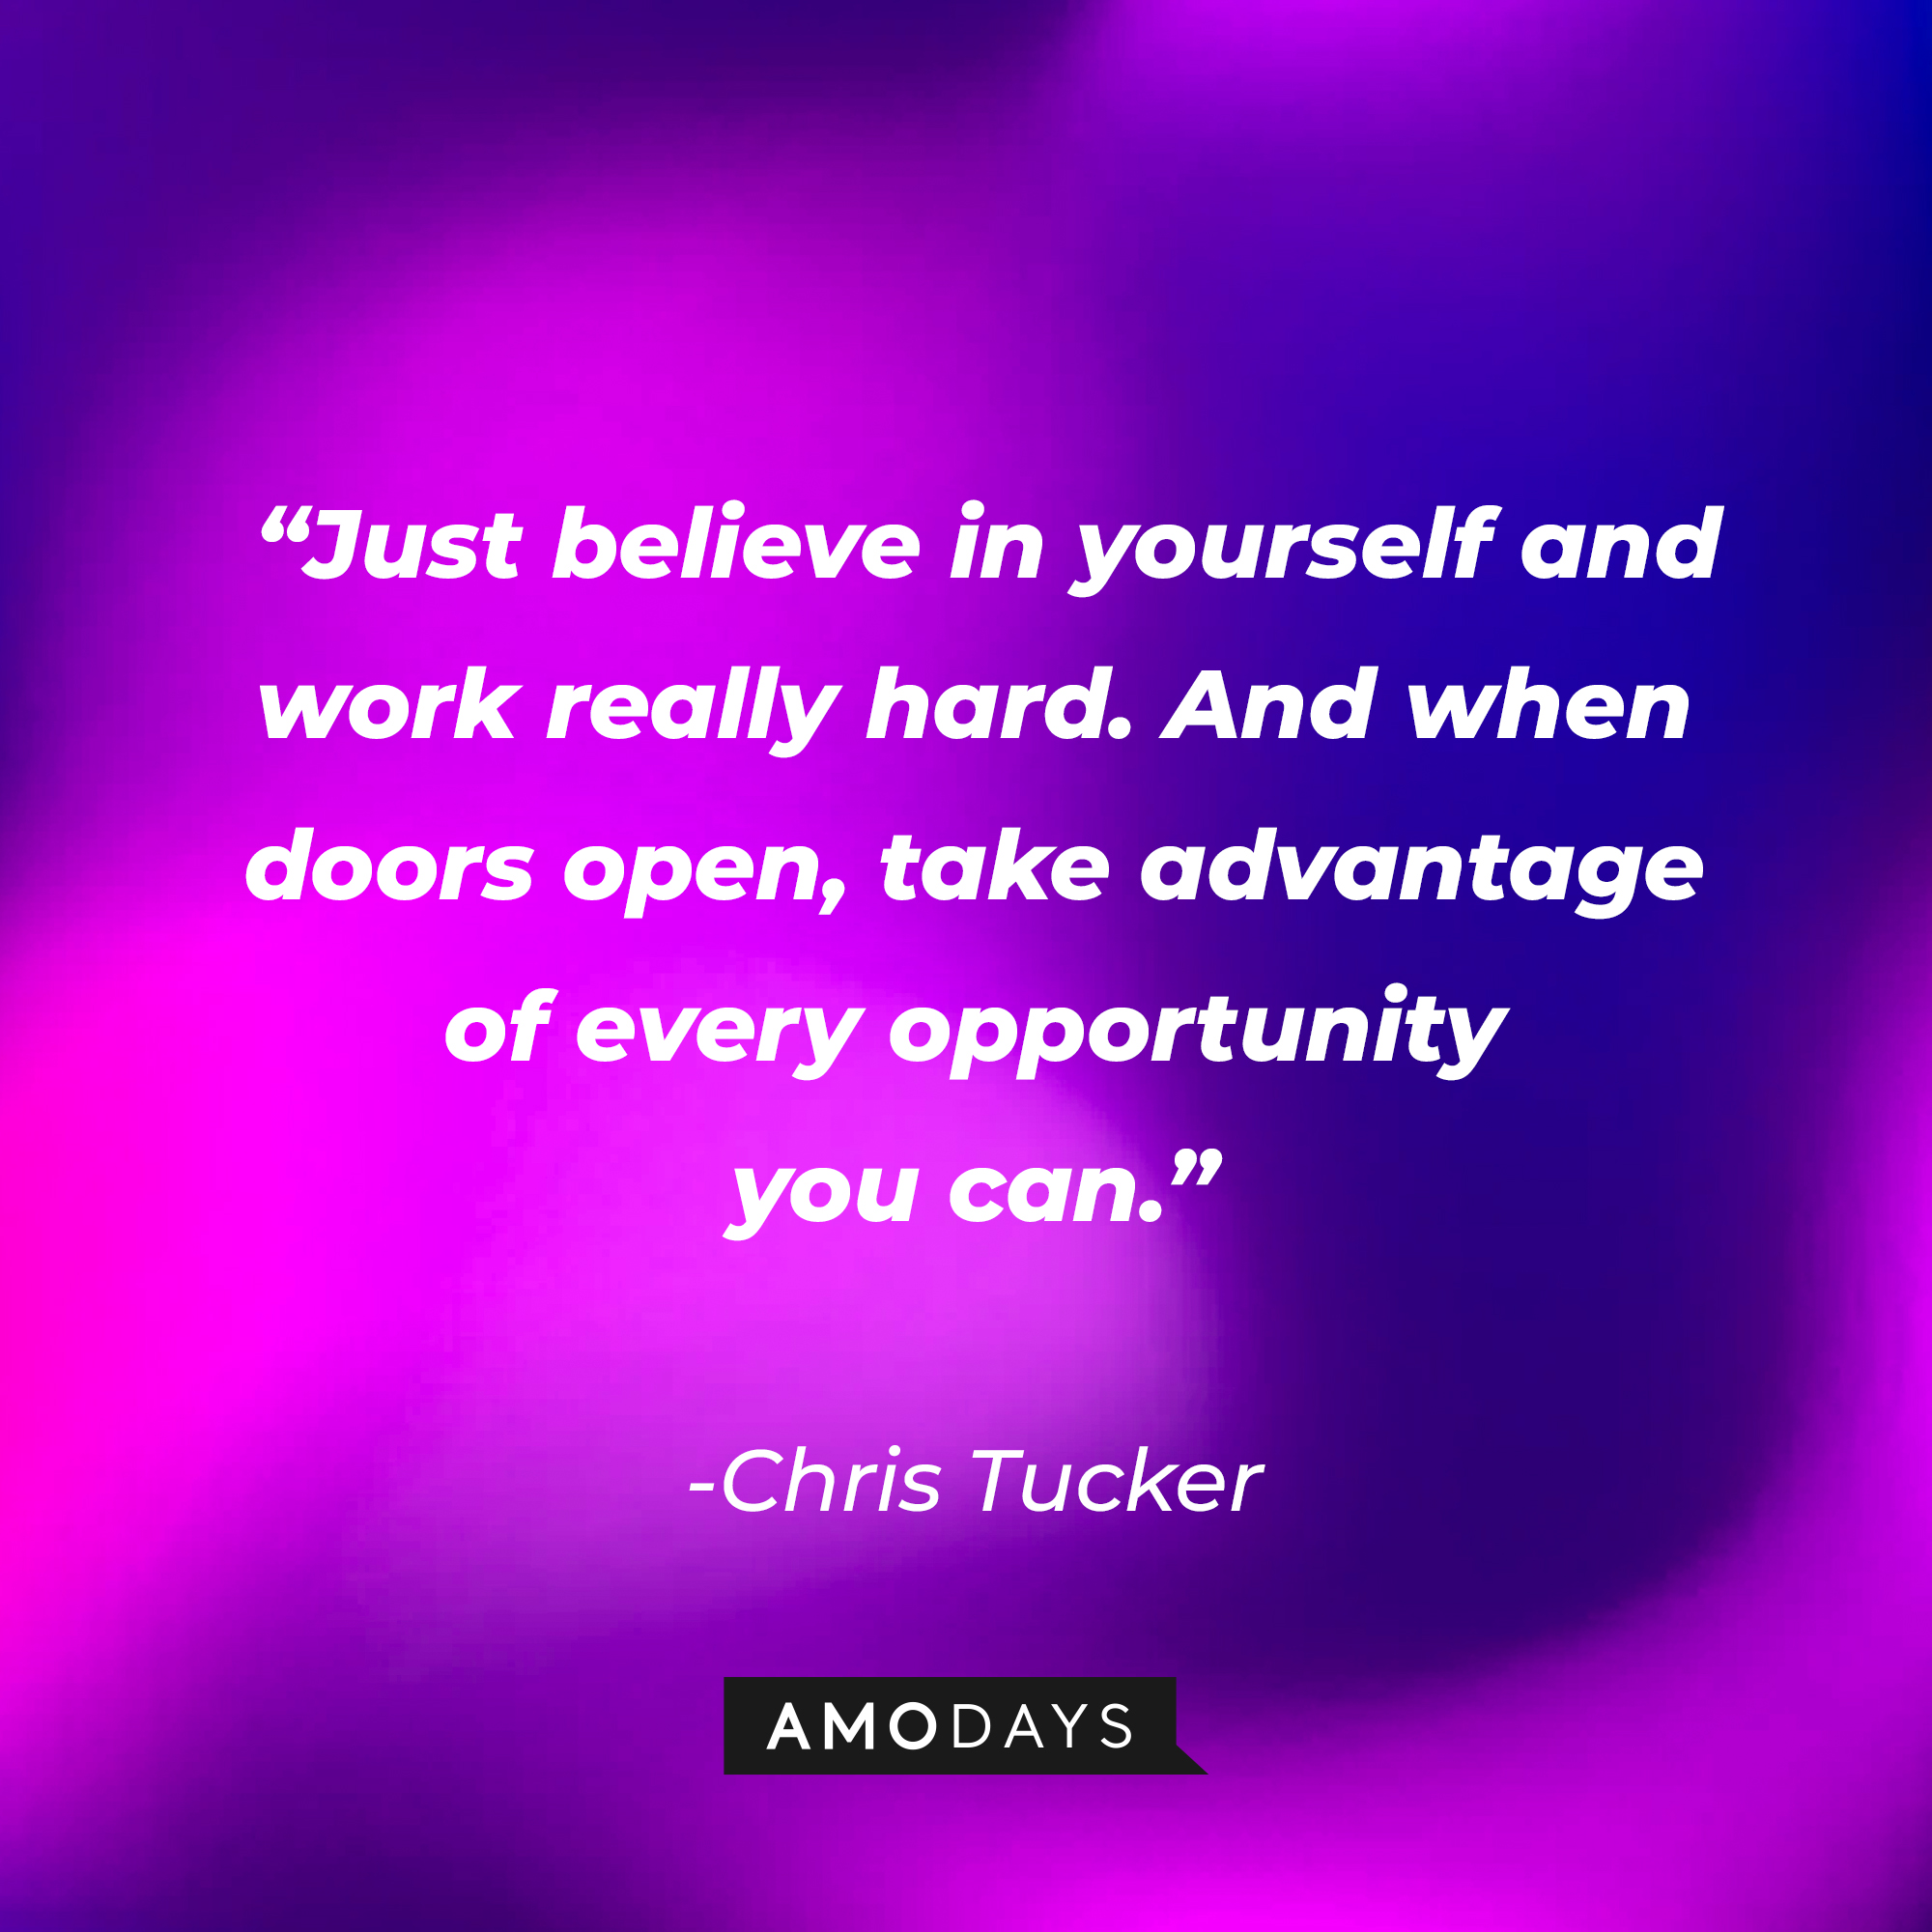 Chris Tucker’s quote: “Just believe in yourself and work really hard. And when doors open, take advantage of every opportunity you can.”┃Source: AmoDays